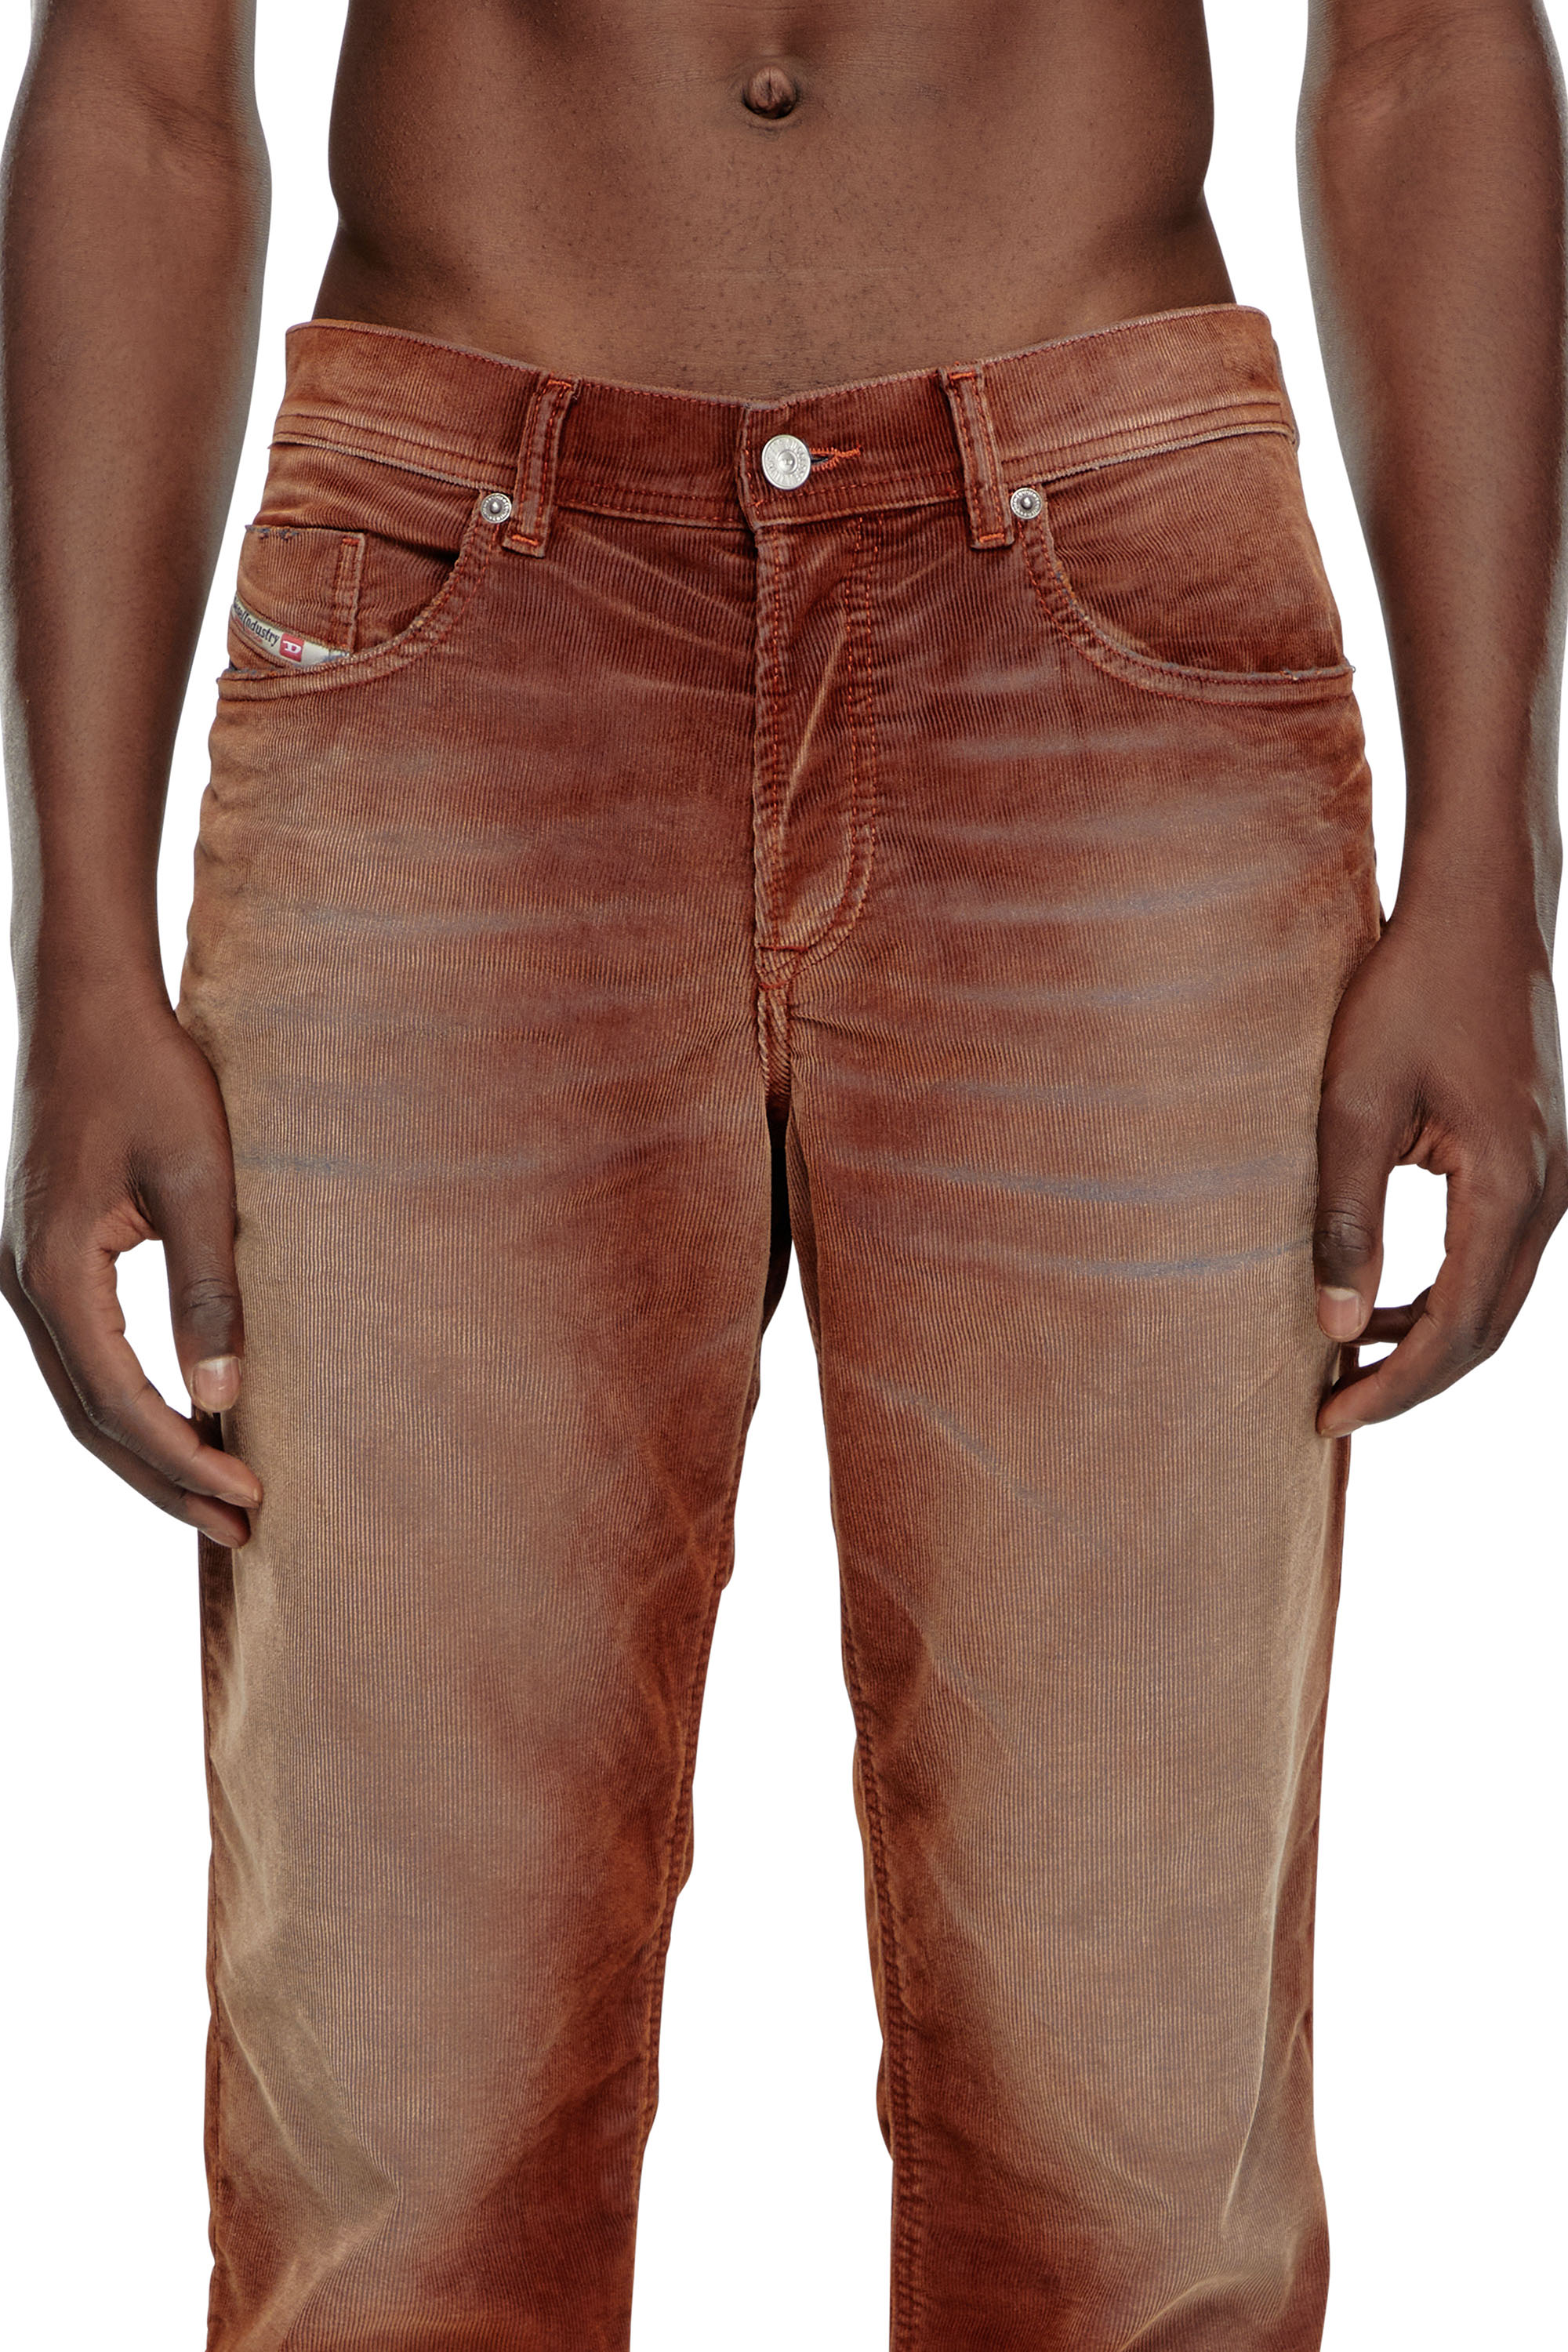 Diesel - Tapered Jeans 2023 D-Finitive 003II, Hombre Tapered Jeans - 2023 D-Finitive in Marrón - Image 5